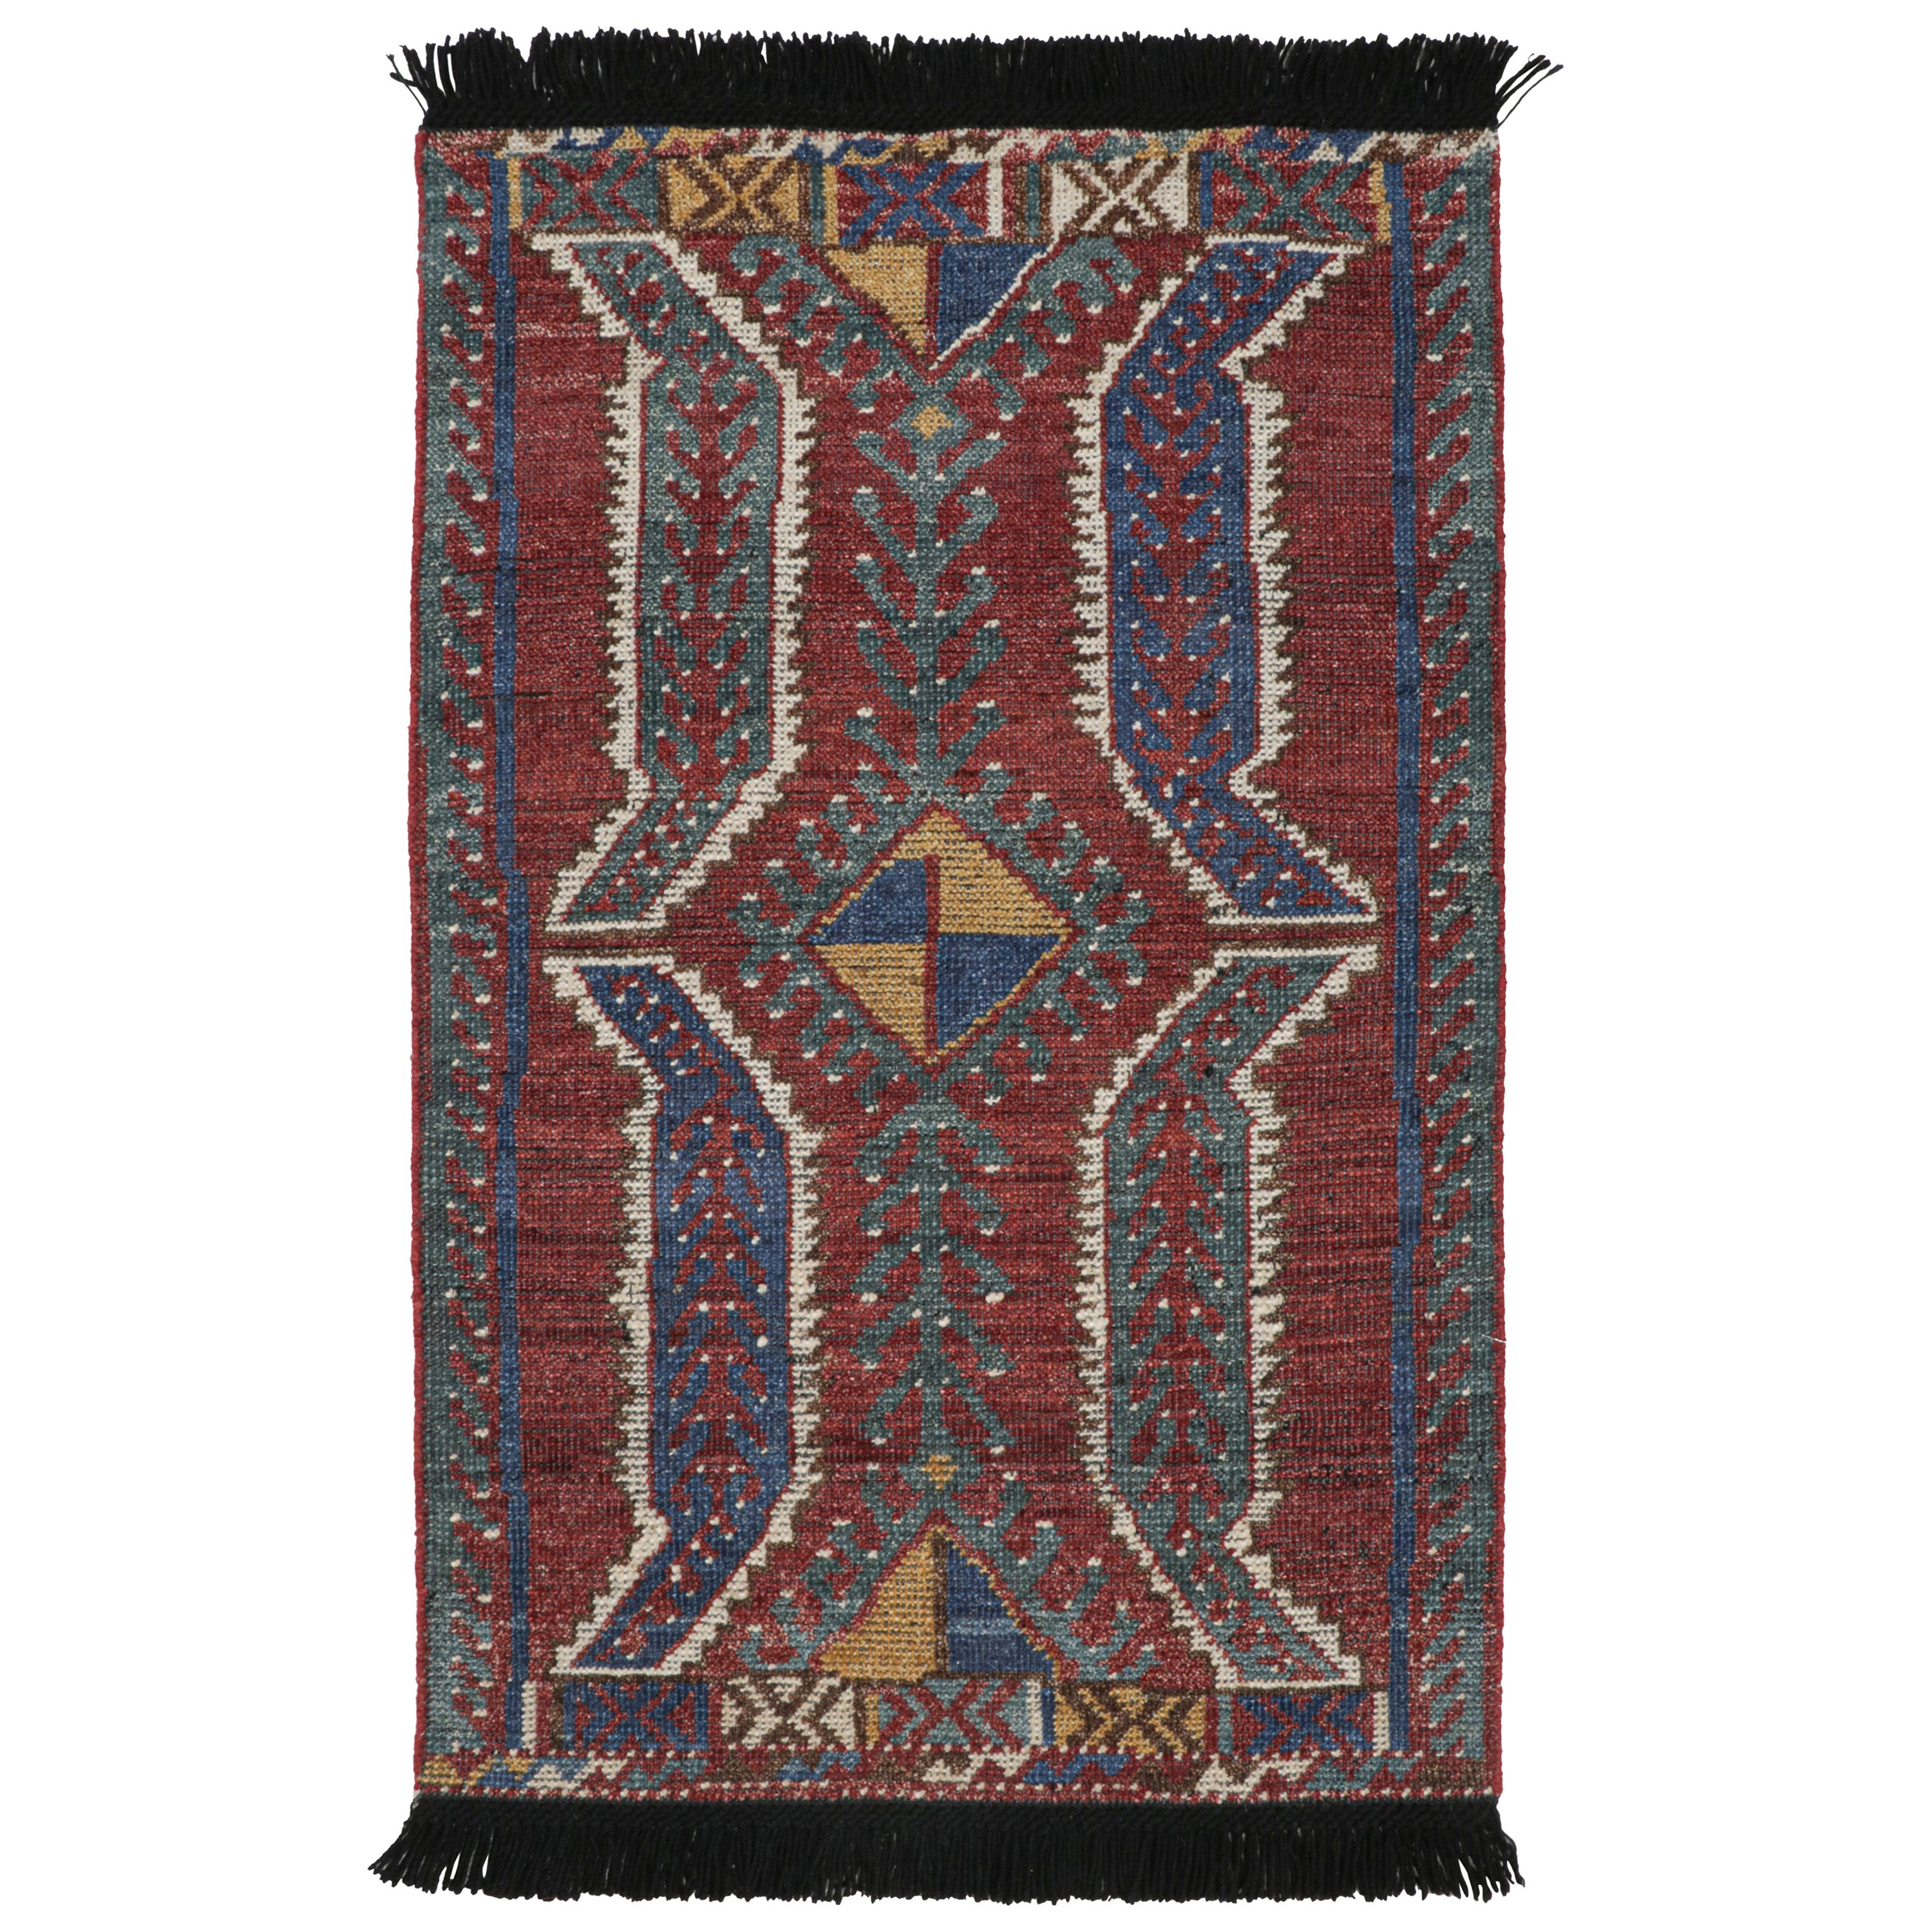 Rug & Kilim’s Tribal Style Rug with Primitivist Geometric Pattern and Medallions